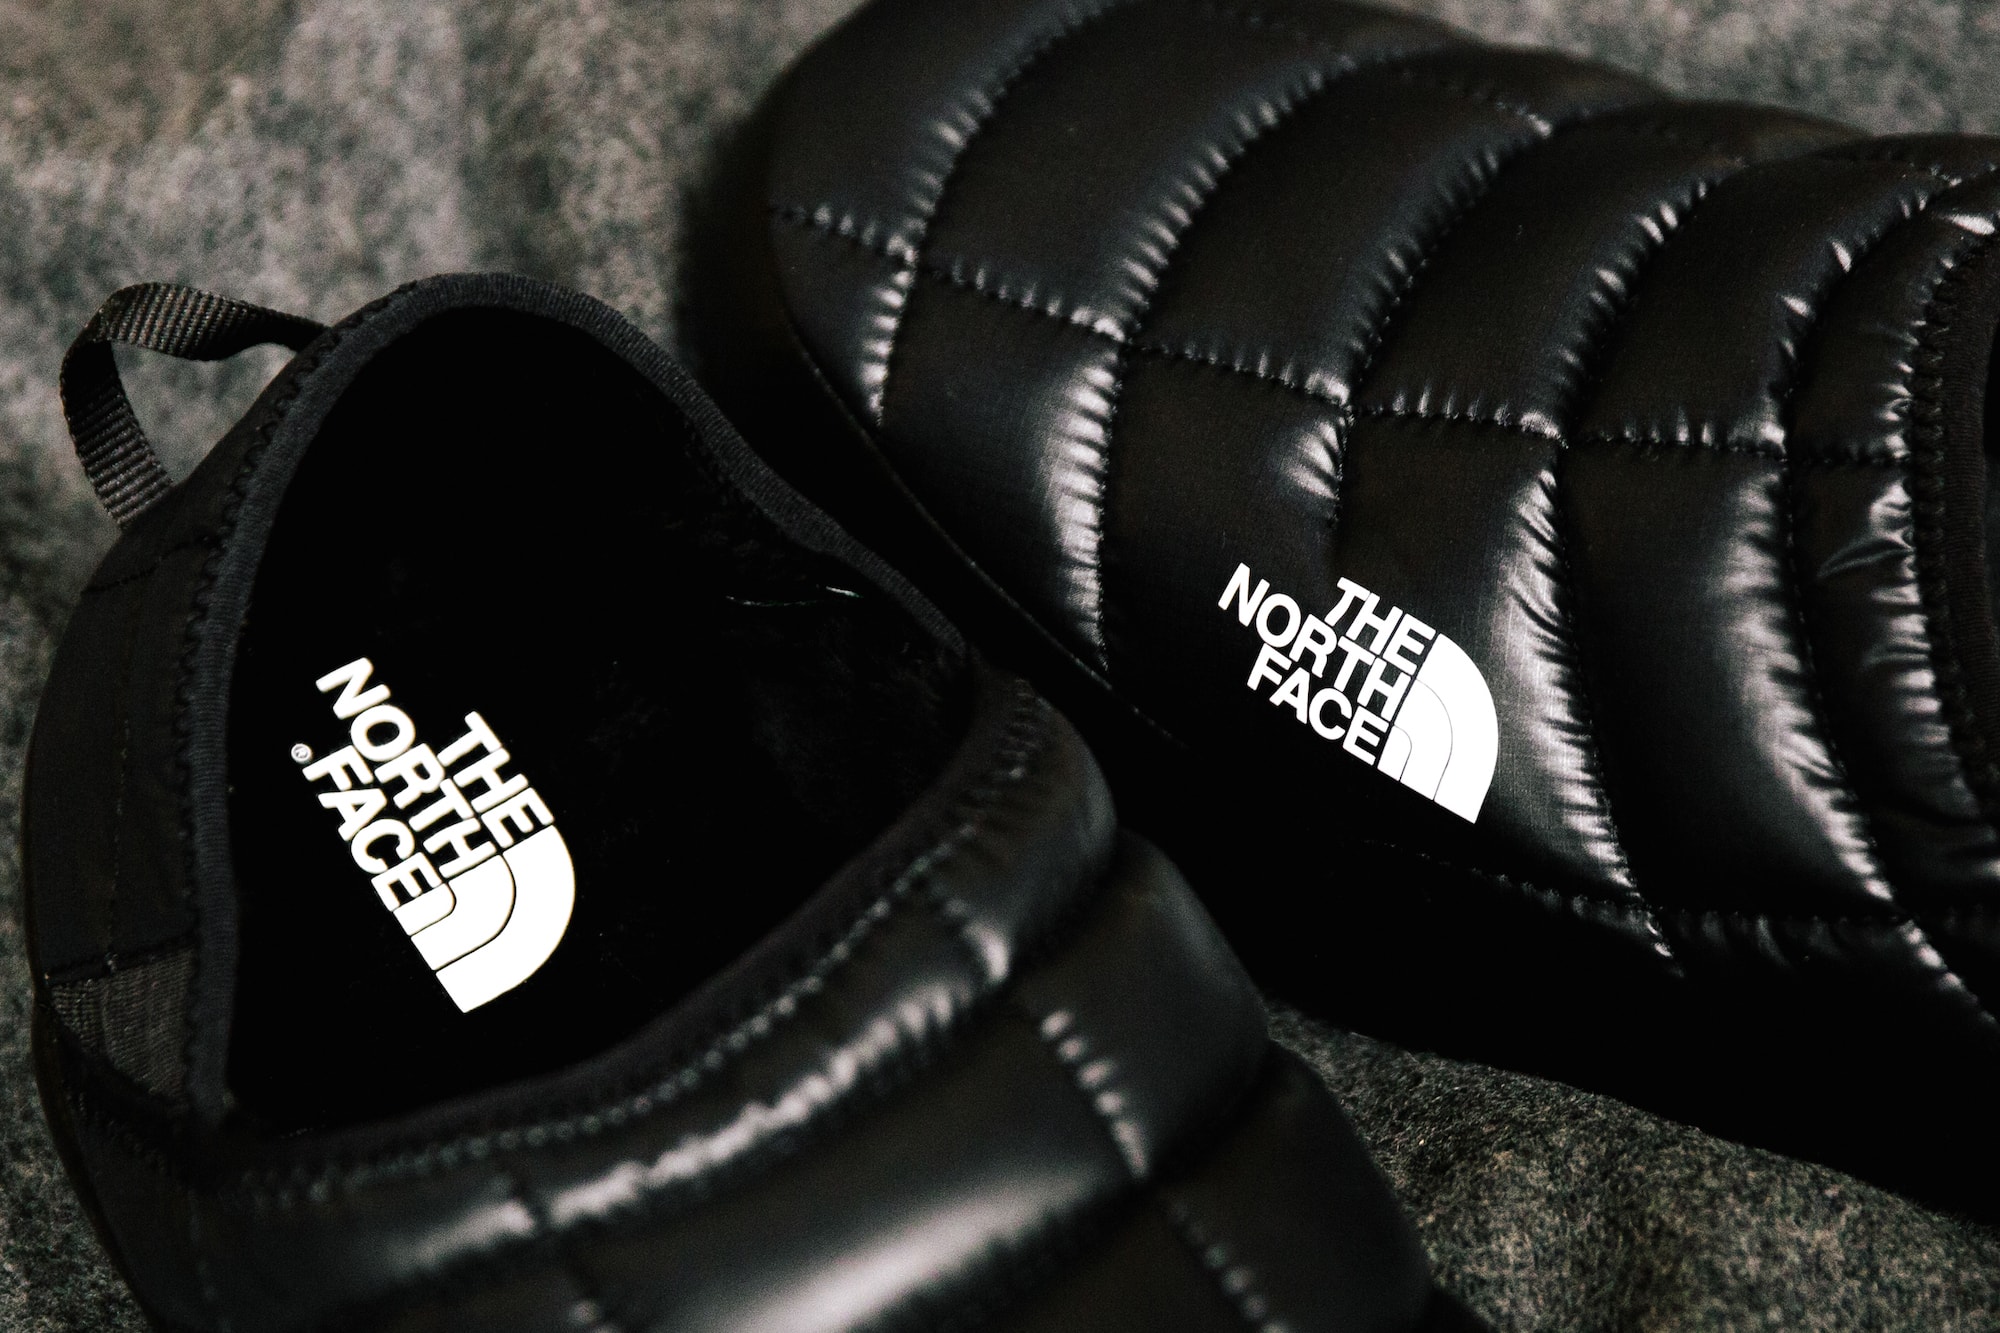 The North Face Puffer Sandals Slides Shoes TNF Winter Warm Footwear 